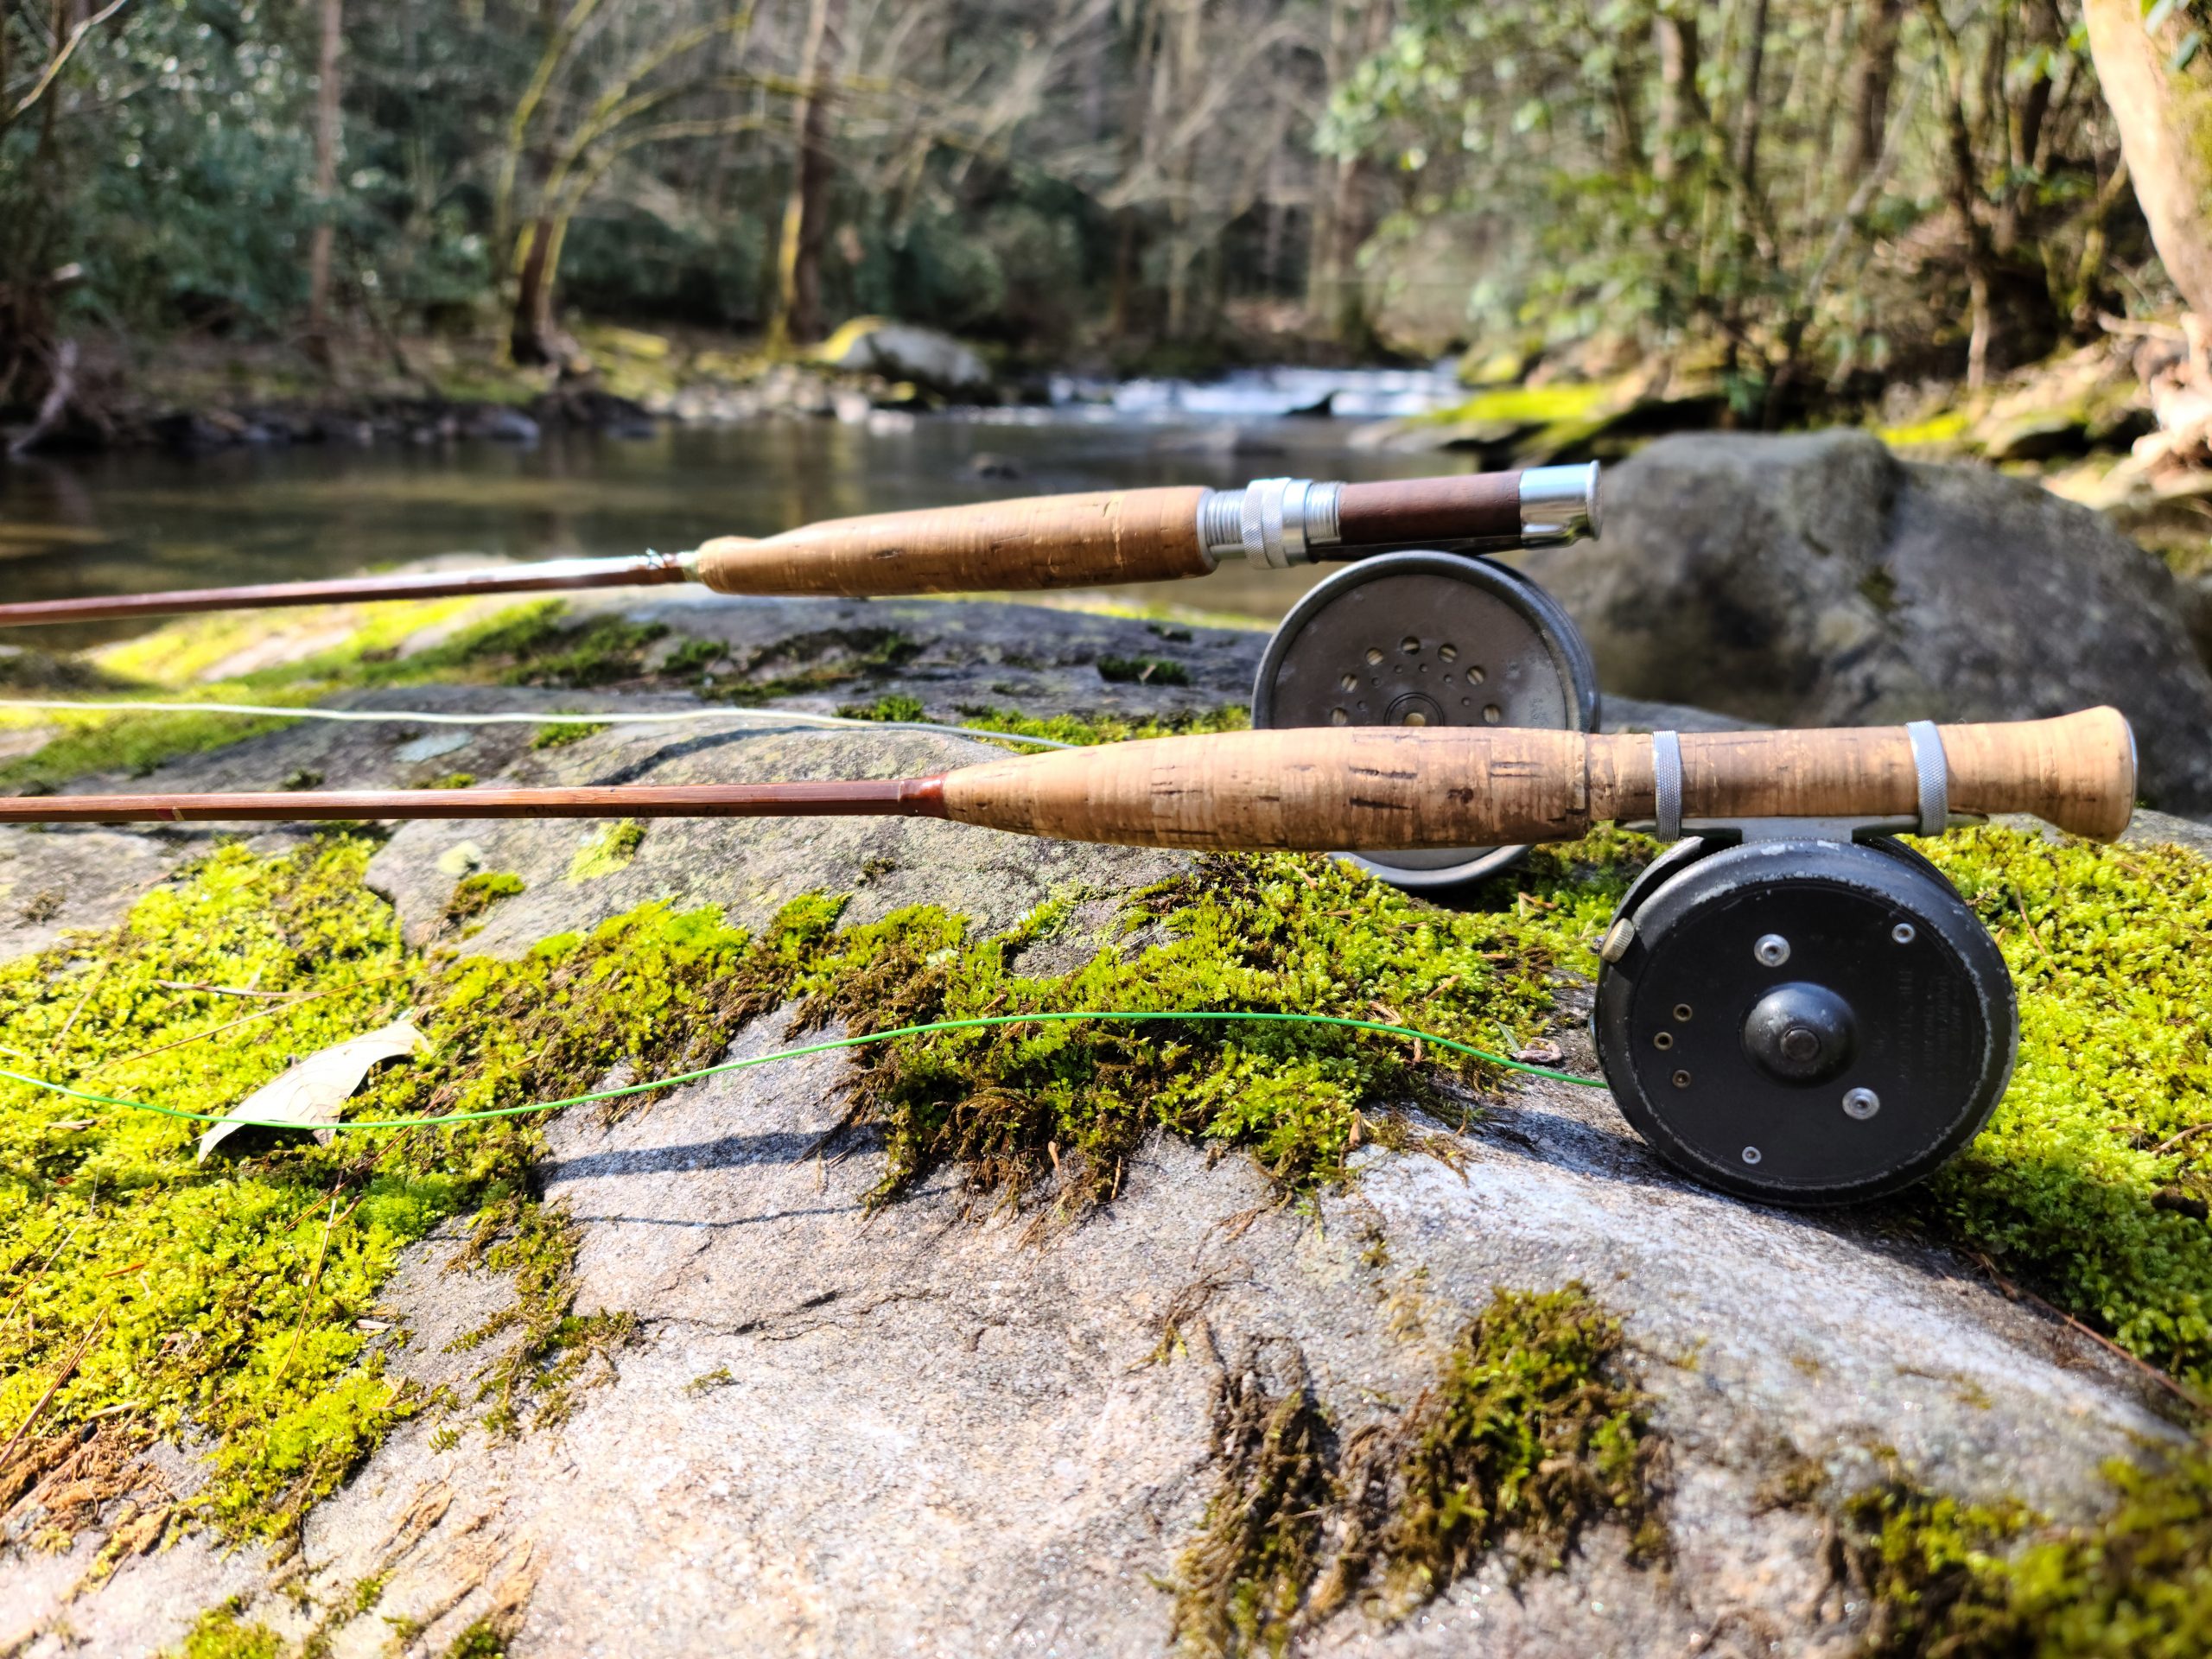 Be it a classic bamboo rod or new carbon rocket, pride of ownership is a huge part of the sport. Despite technology’s advancements, bamboo rods are still considered by many to be the ultimate in fly fishing, especially on an inviting mountain stream. They are well-paired with Hardy Reels — two classics working together!